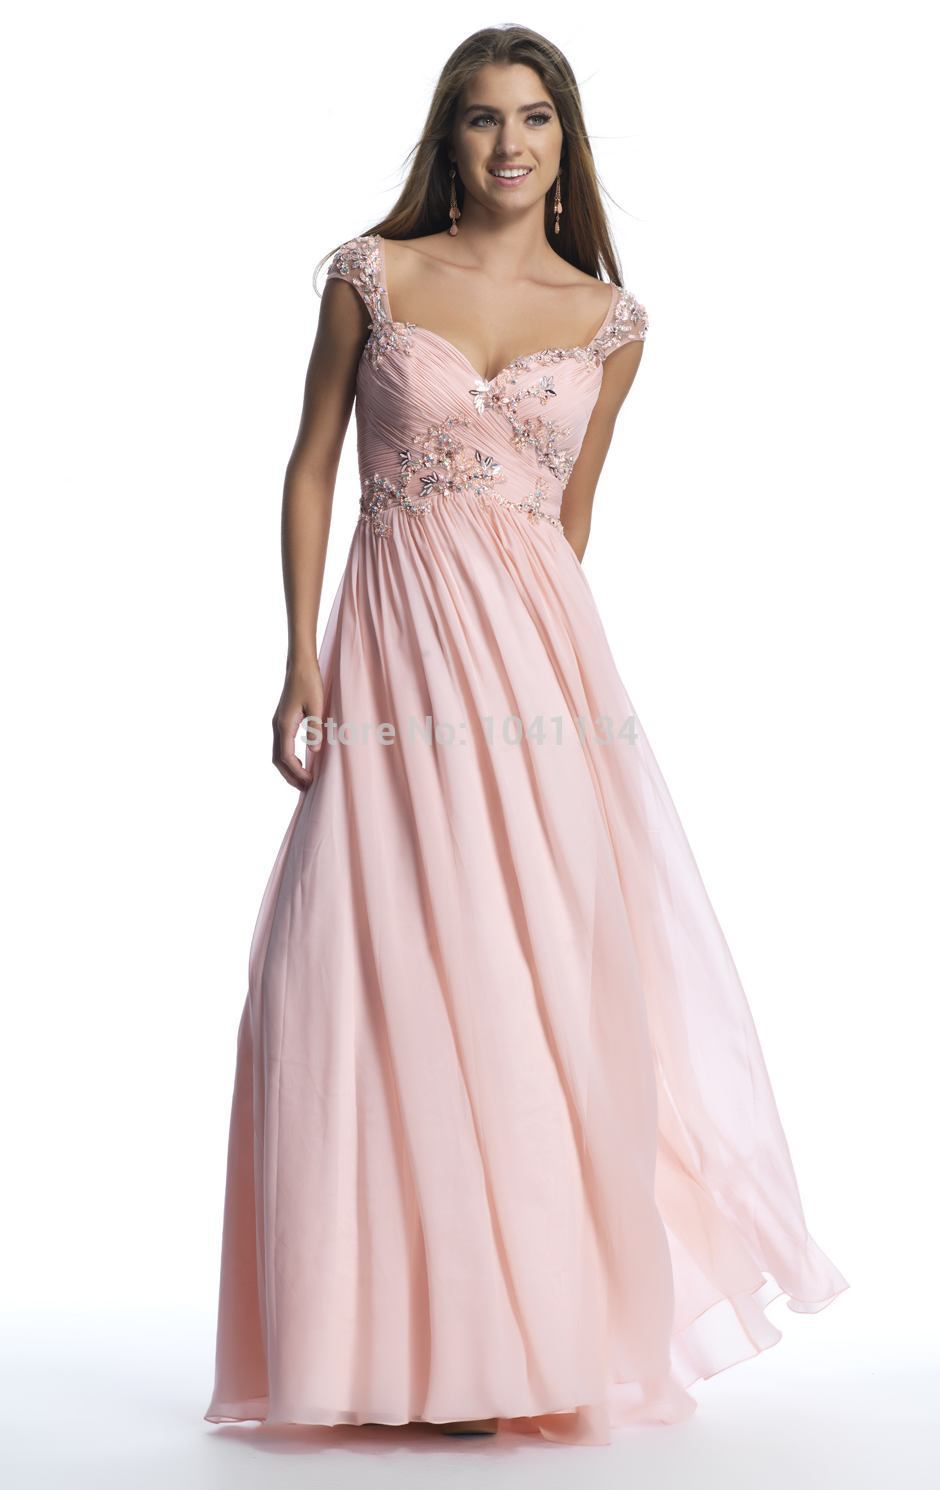 Blush Prom Dresses Sexy Chiffon Prom Gowns 2014 A Line Cap Sleeves ...